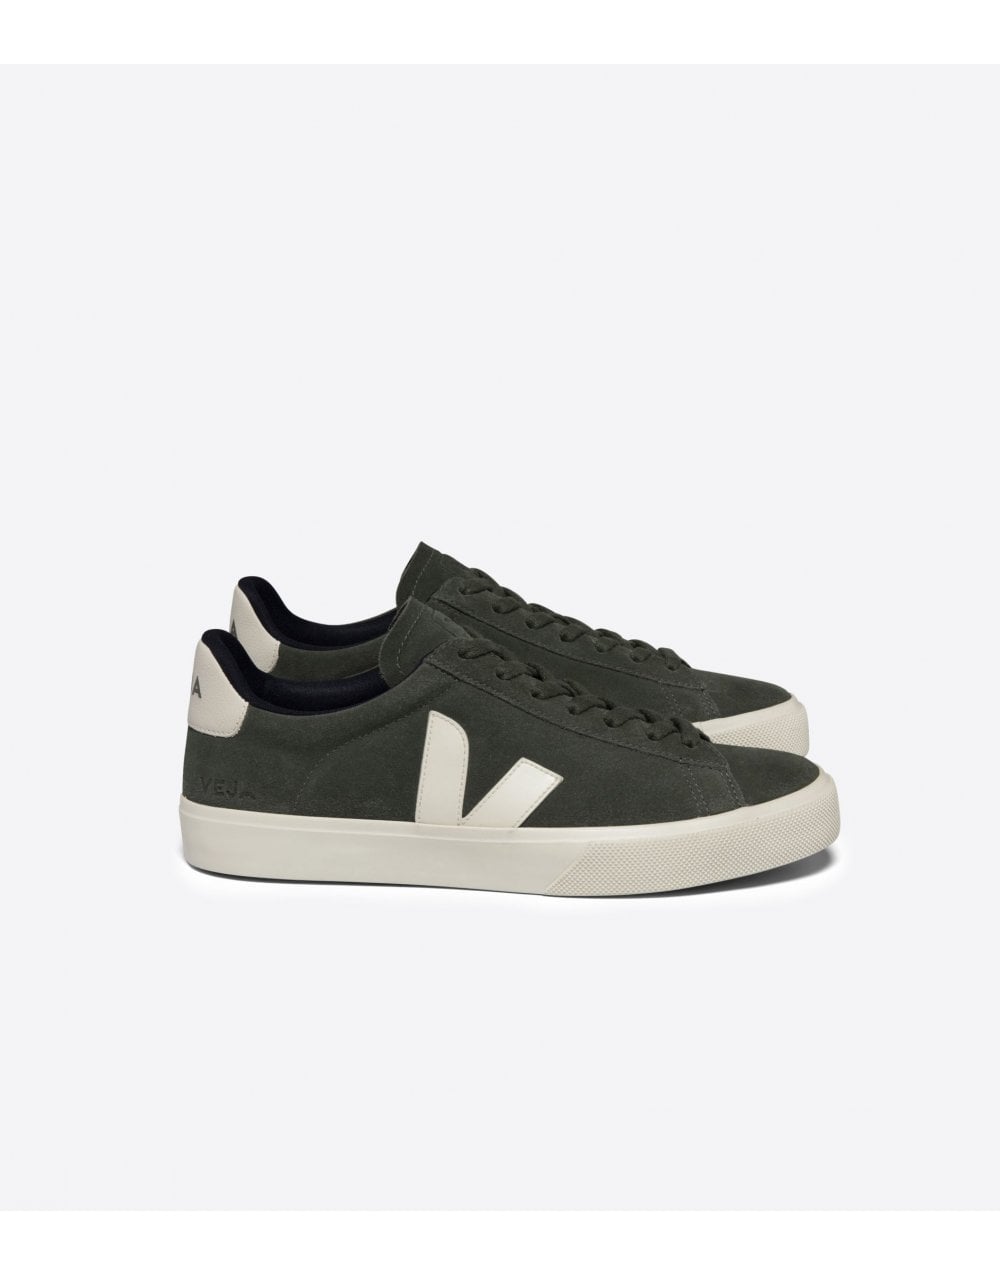 Veja Campo Suede Trainers Col: Mud/pierre, Size: 6